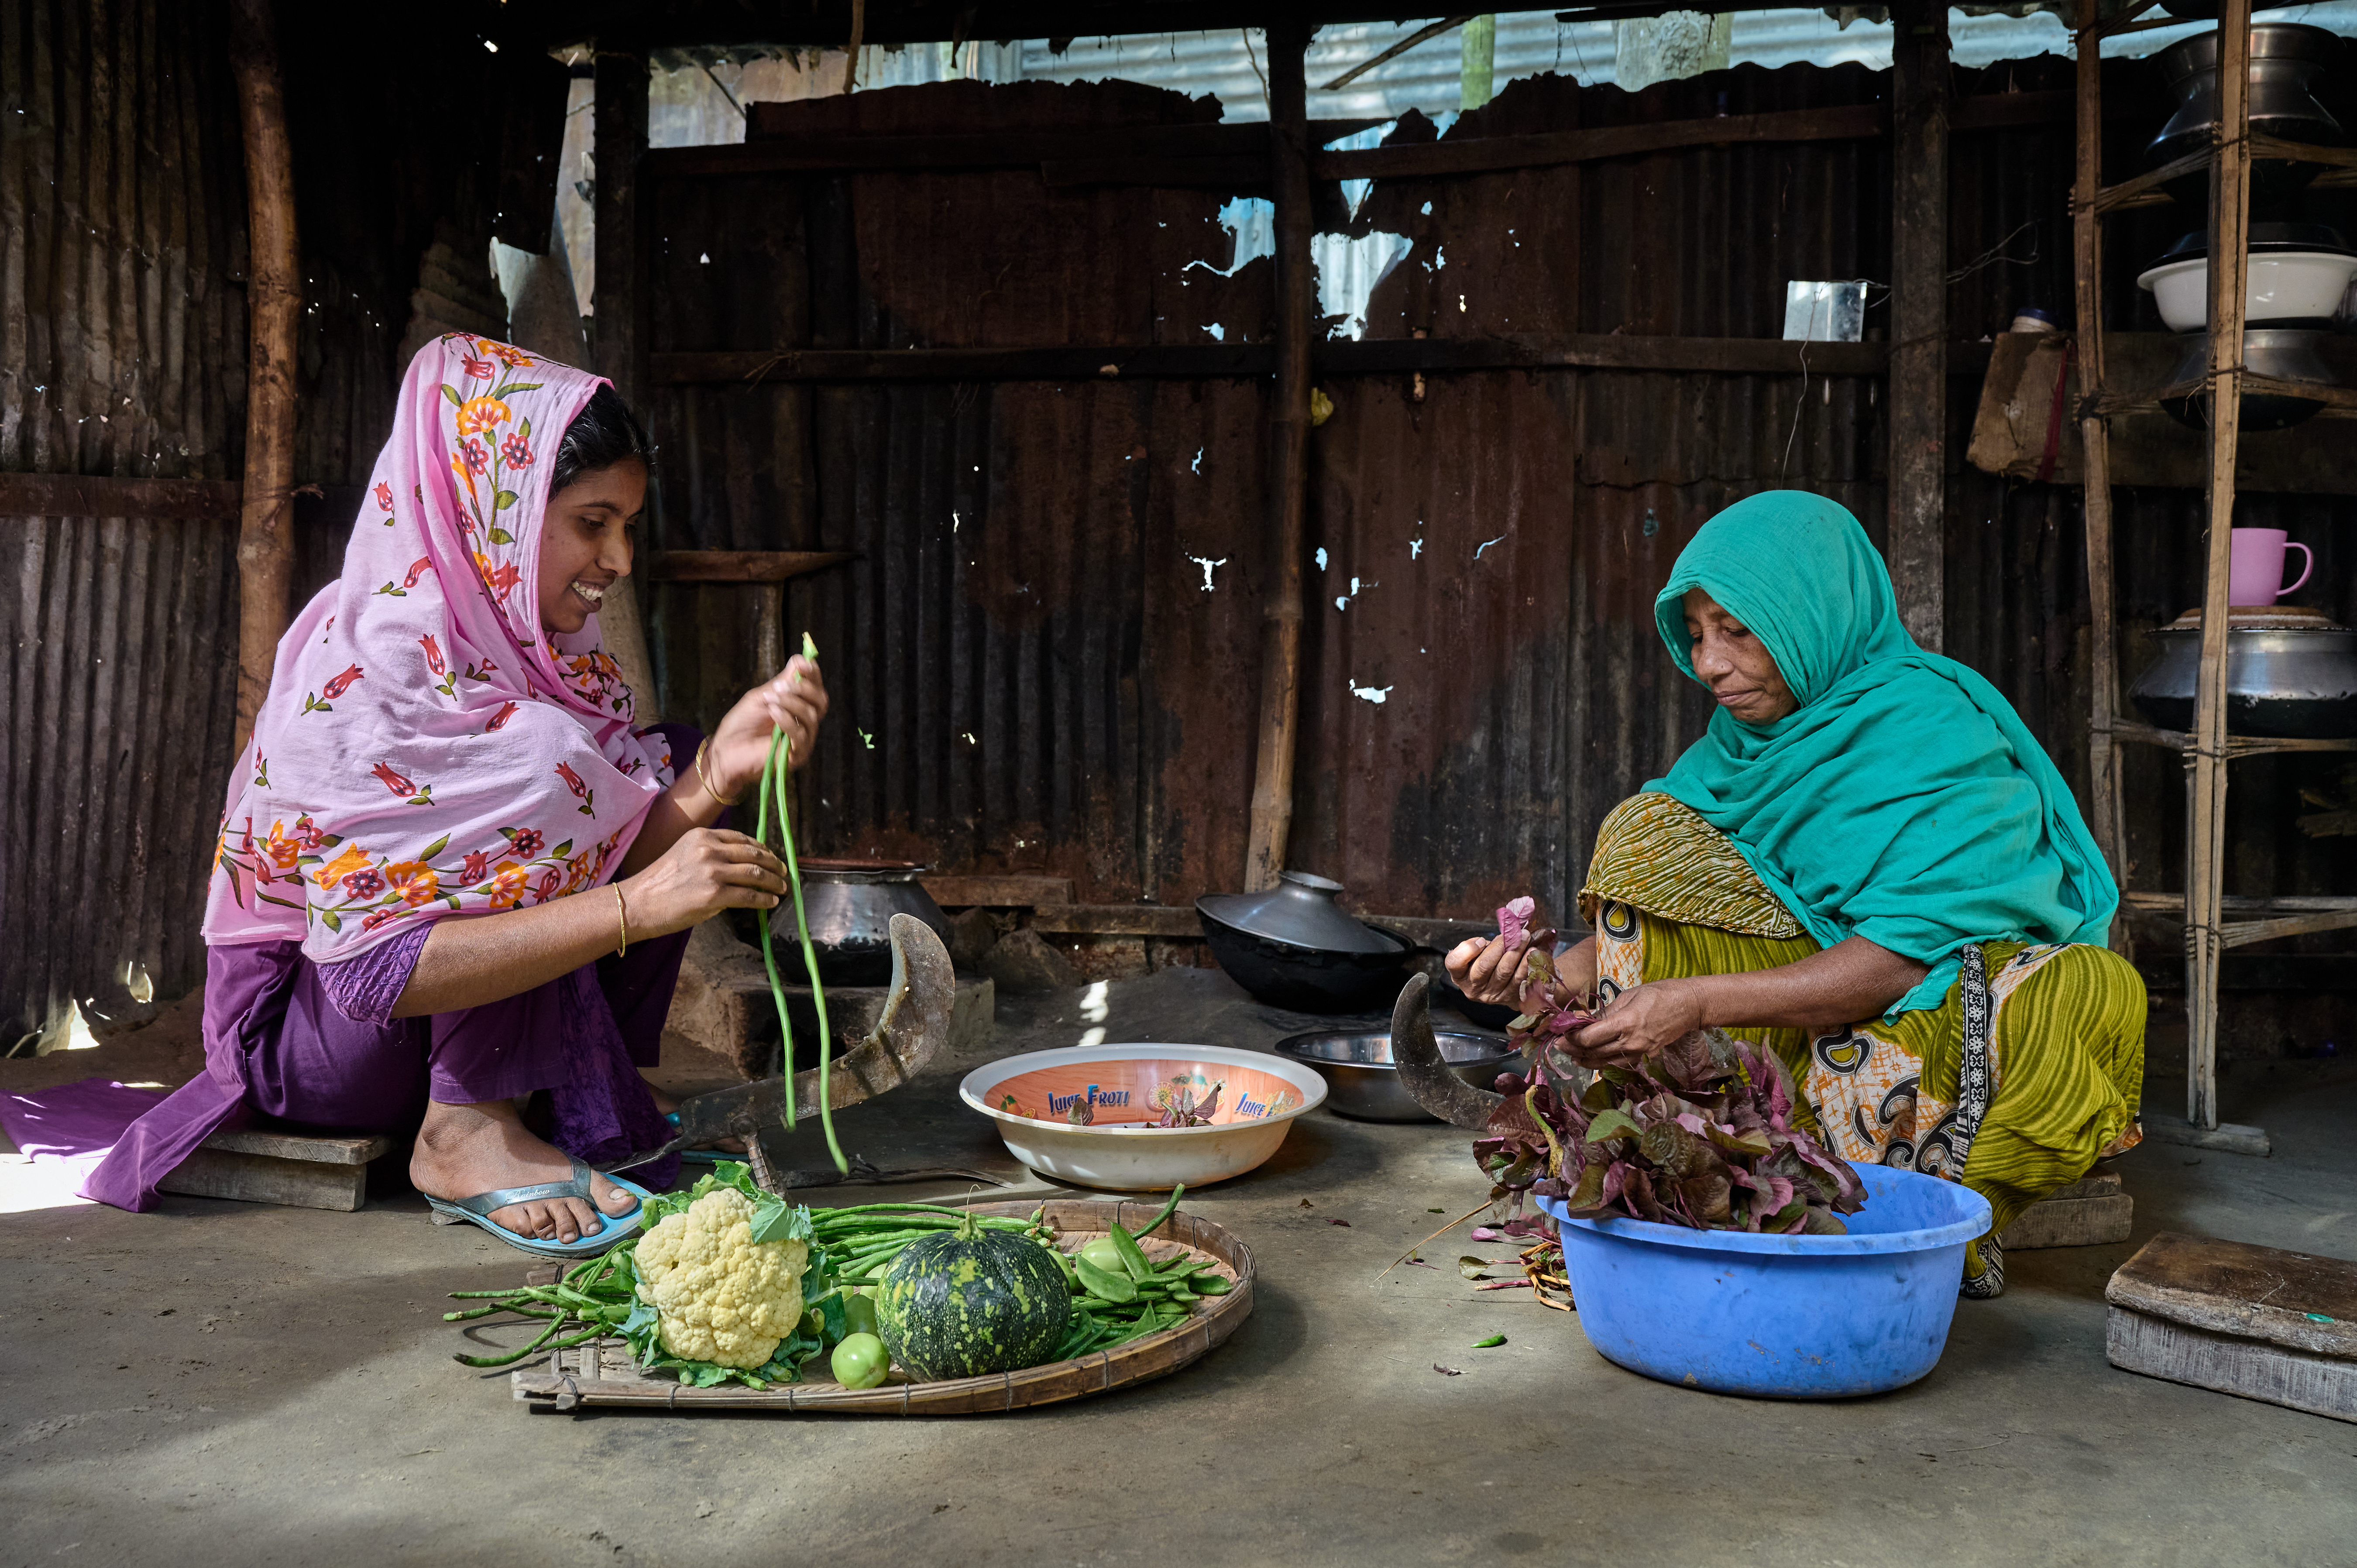 Two women prepare the midday meal together. Rice is the common base for meals, and they are preparing vegetable curry to accompany it.